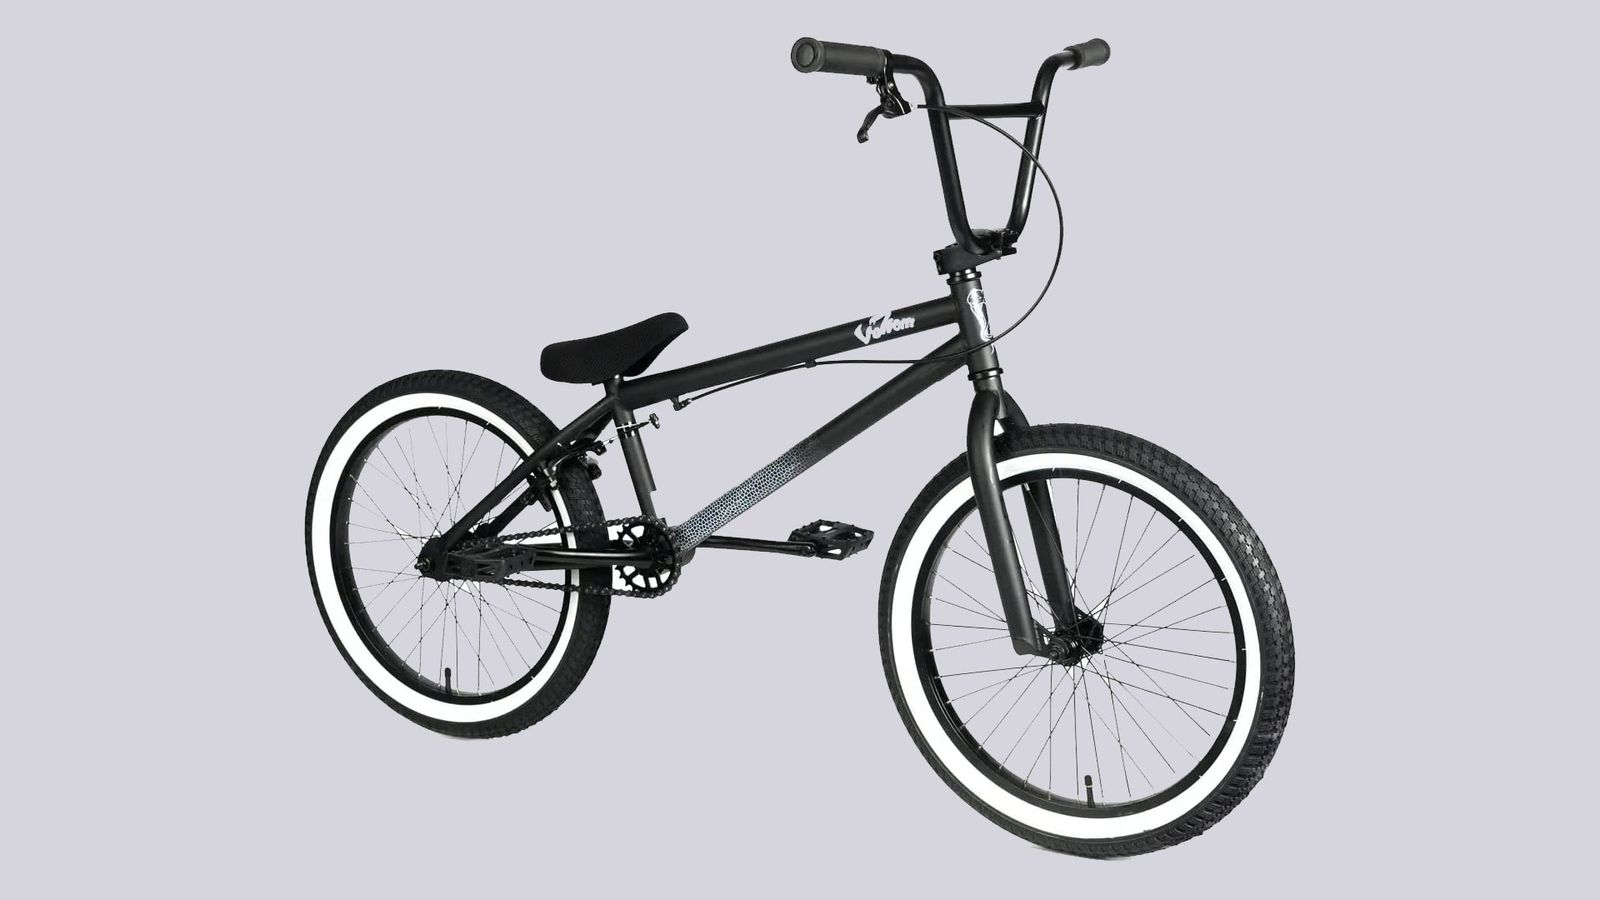 Venom 2021 product image of a black-framed bike with white wall wheels and frame accents.